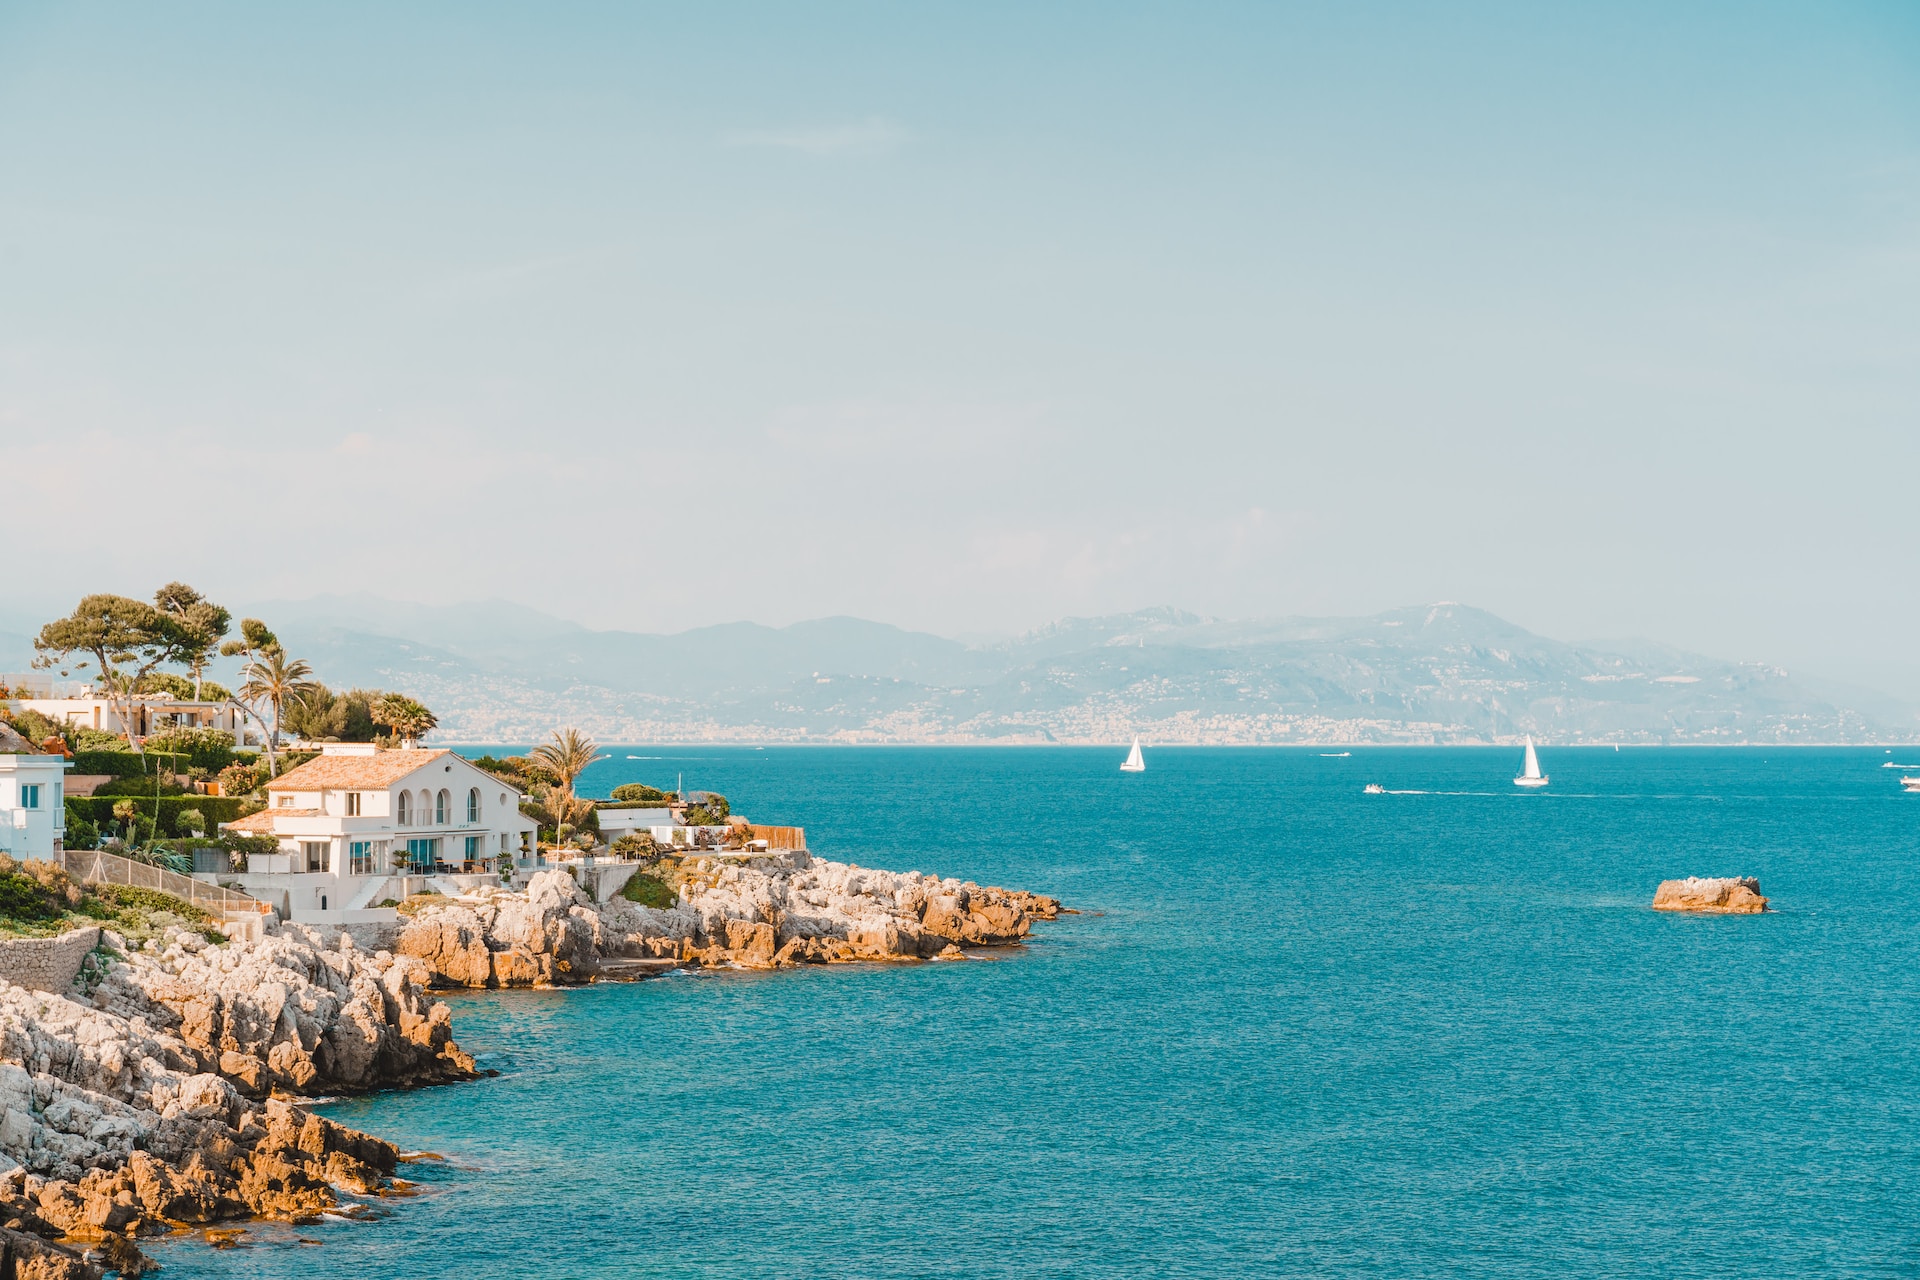 Houses on rocky shoreline above blue water along coast of Antibes